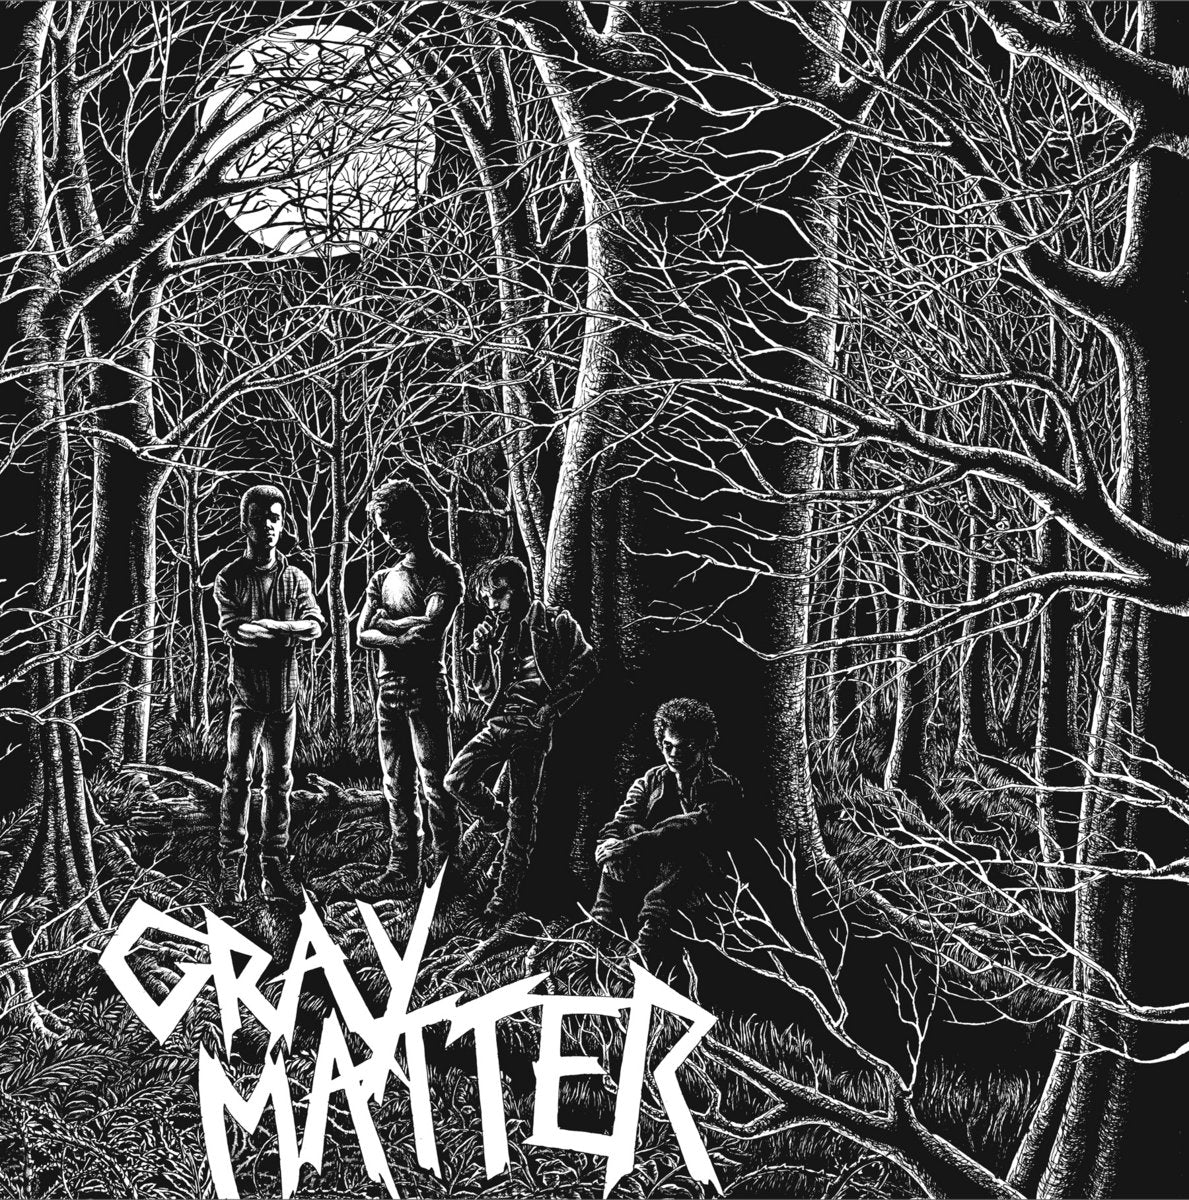 GRAY MATTER "FOOD FOR THOUGHT"